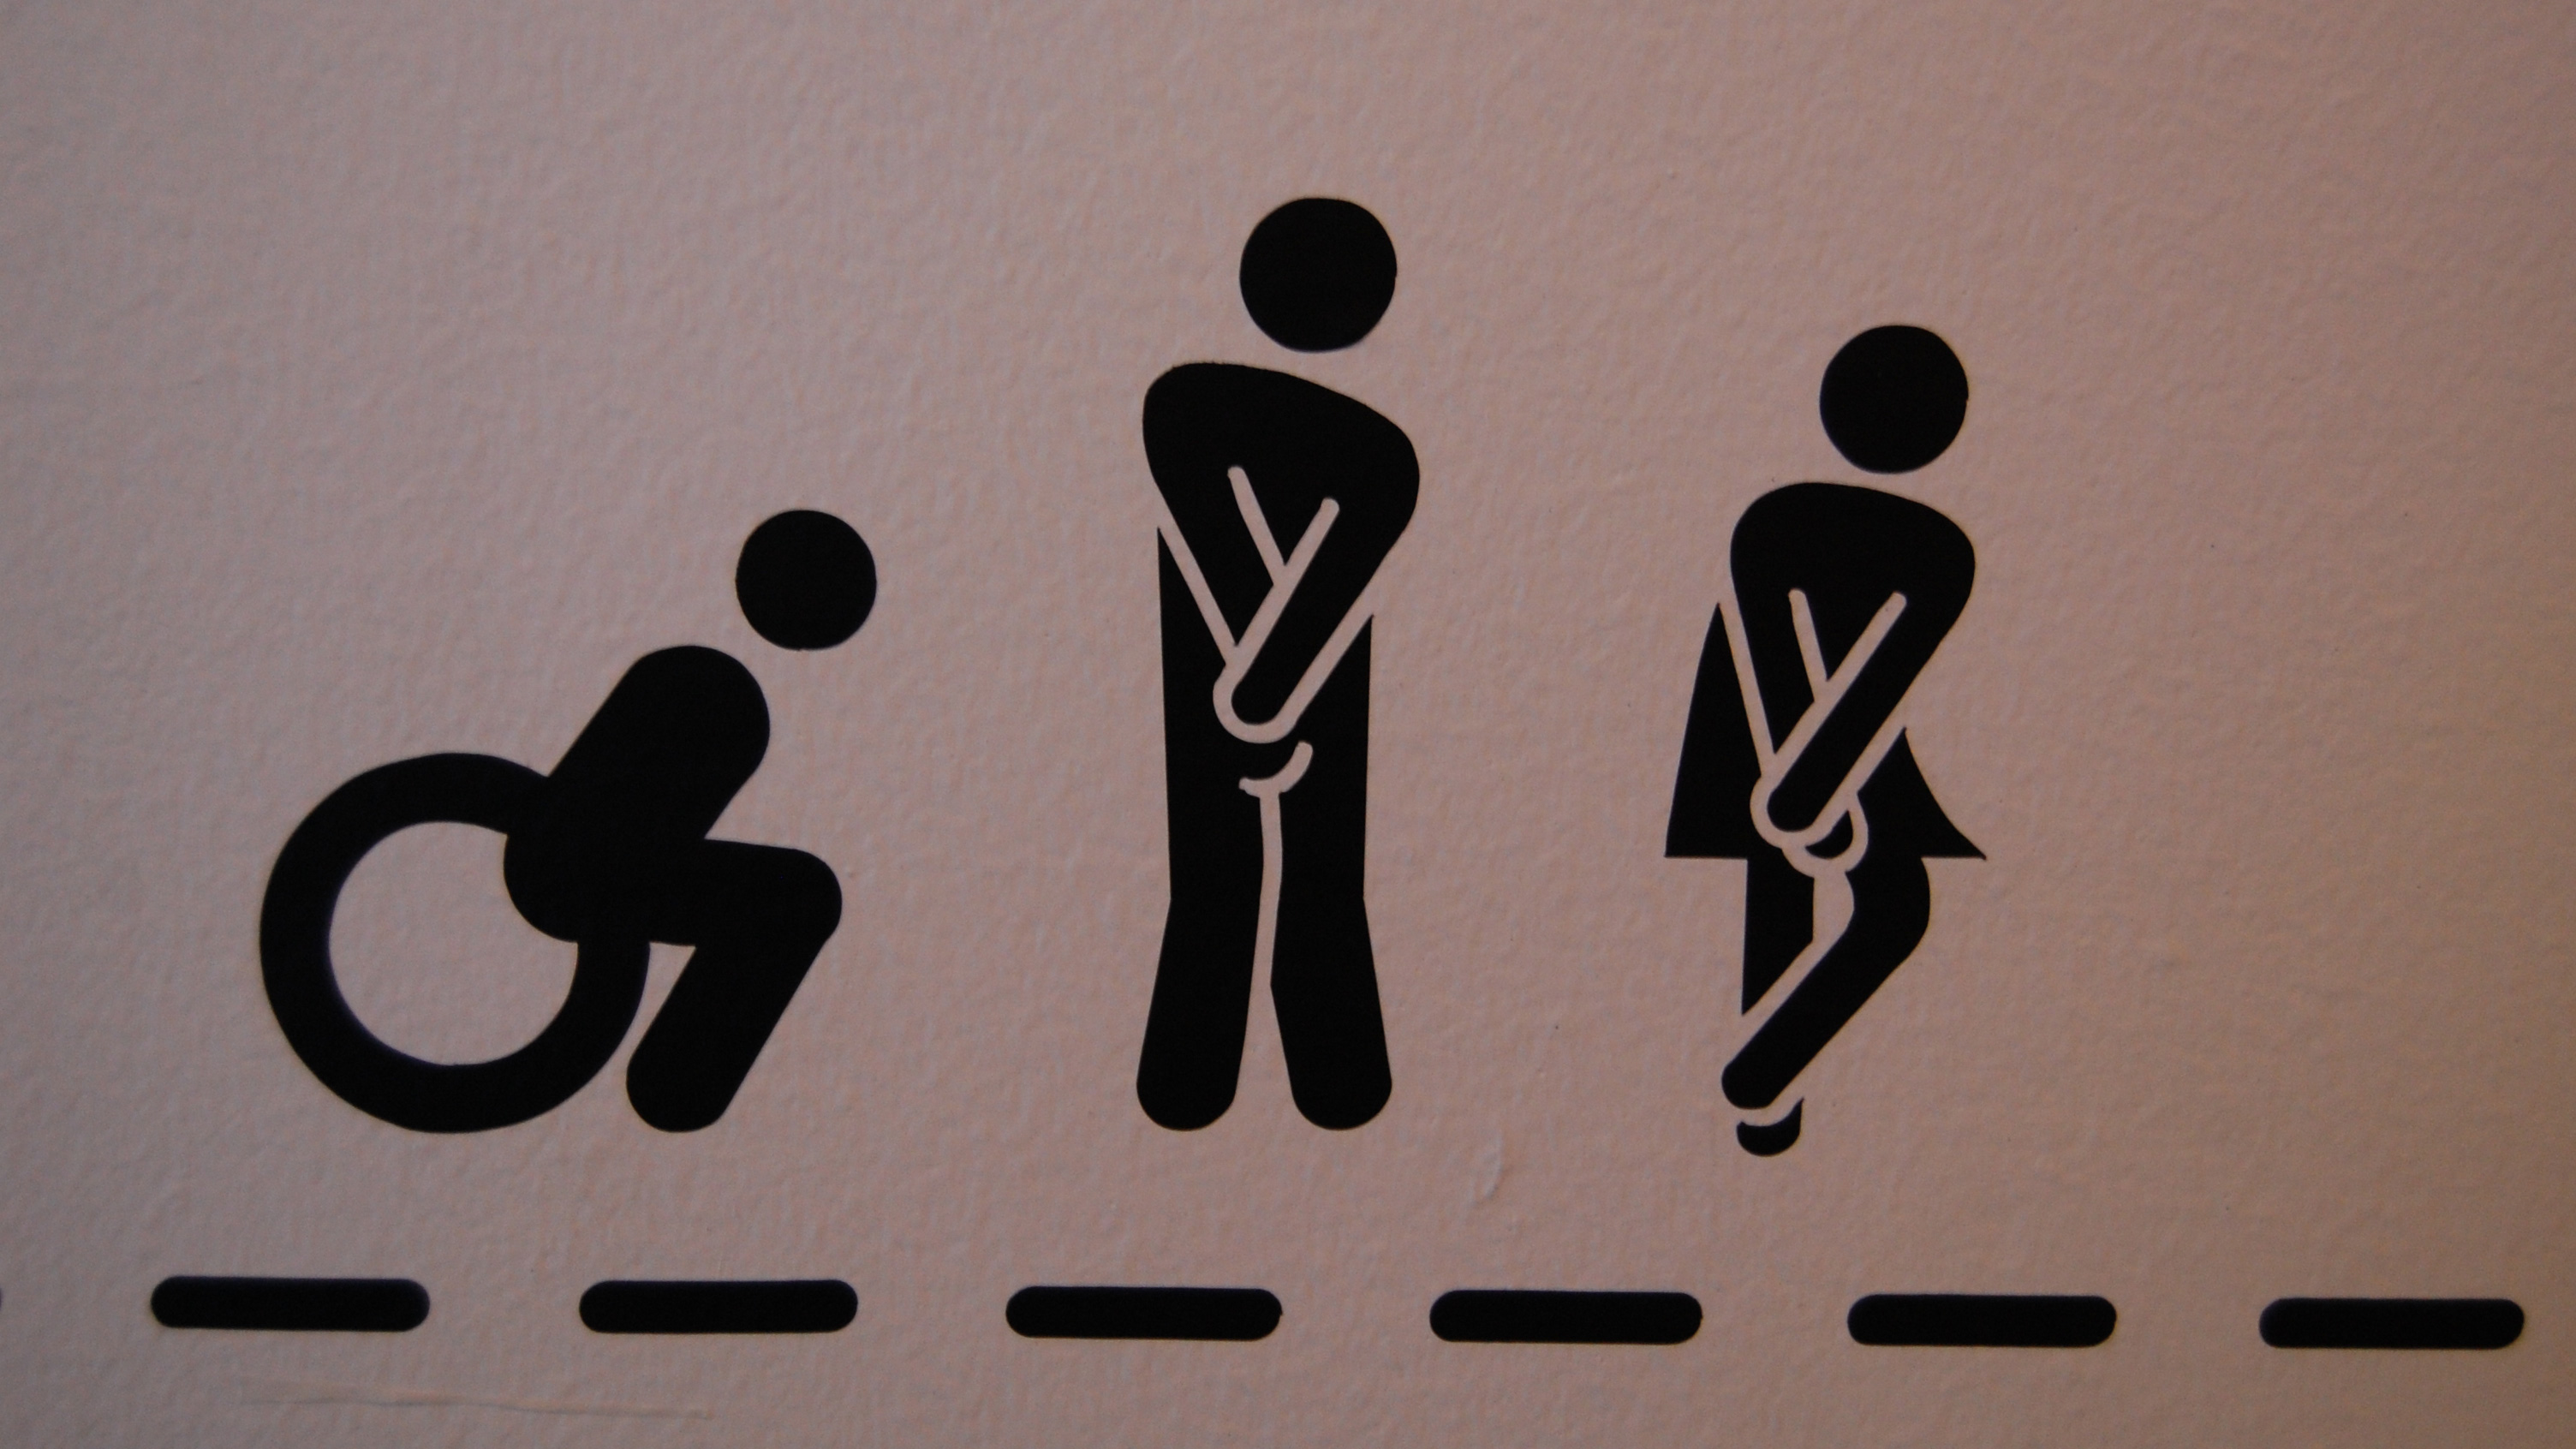 European Toilet Tricks to Know Before You Go by Rick Steves